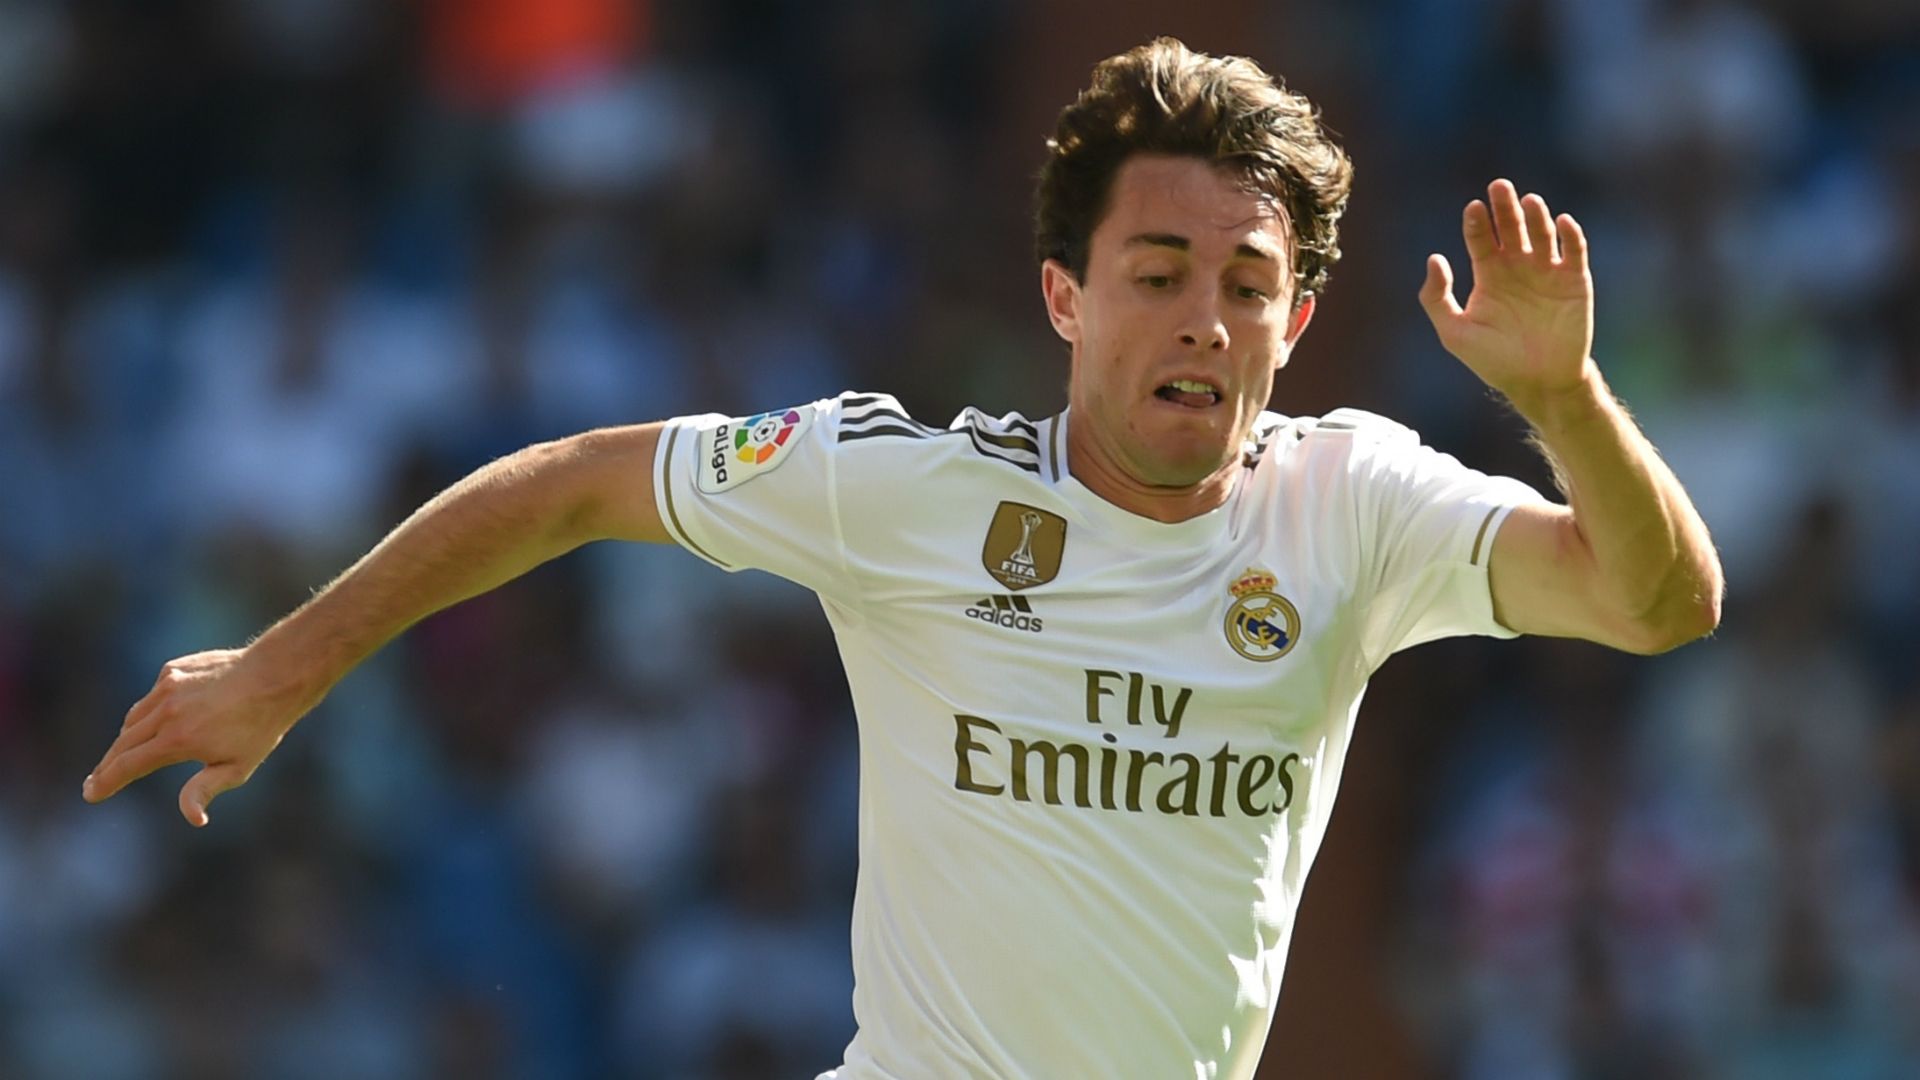 Madrid's Odriozola loaned to Bayern for rest of the season